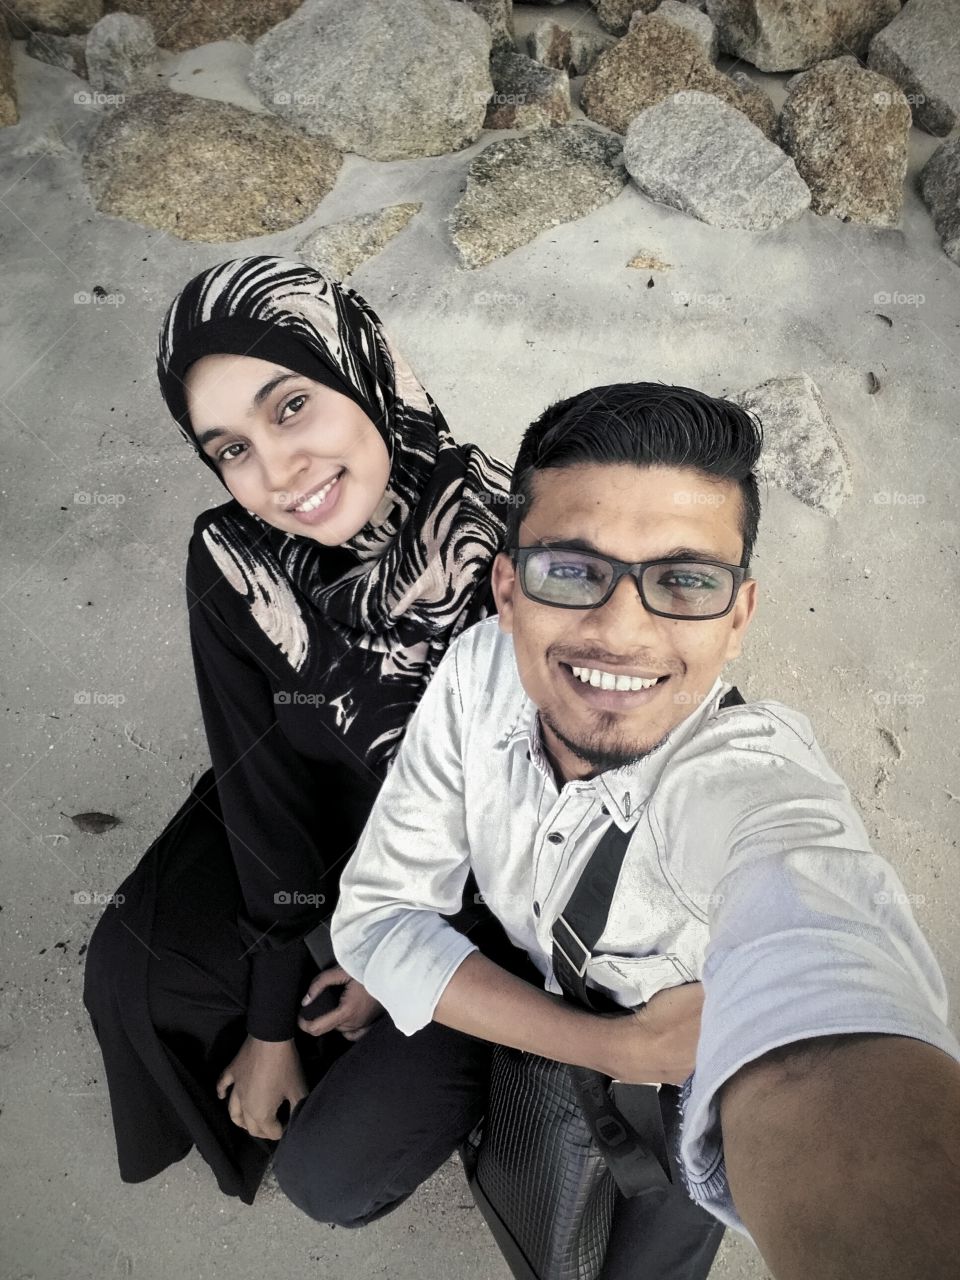 with love at penang beach. selfie with lovely wife at teluk bahang beach